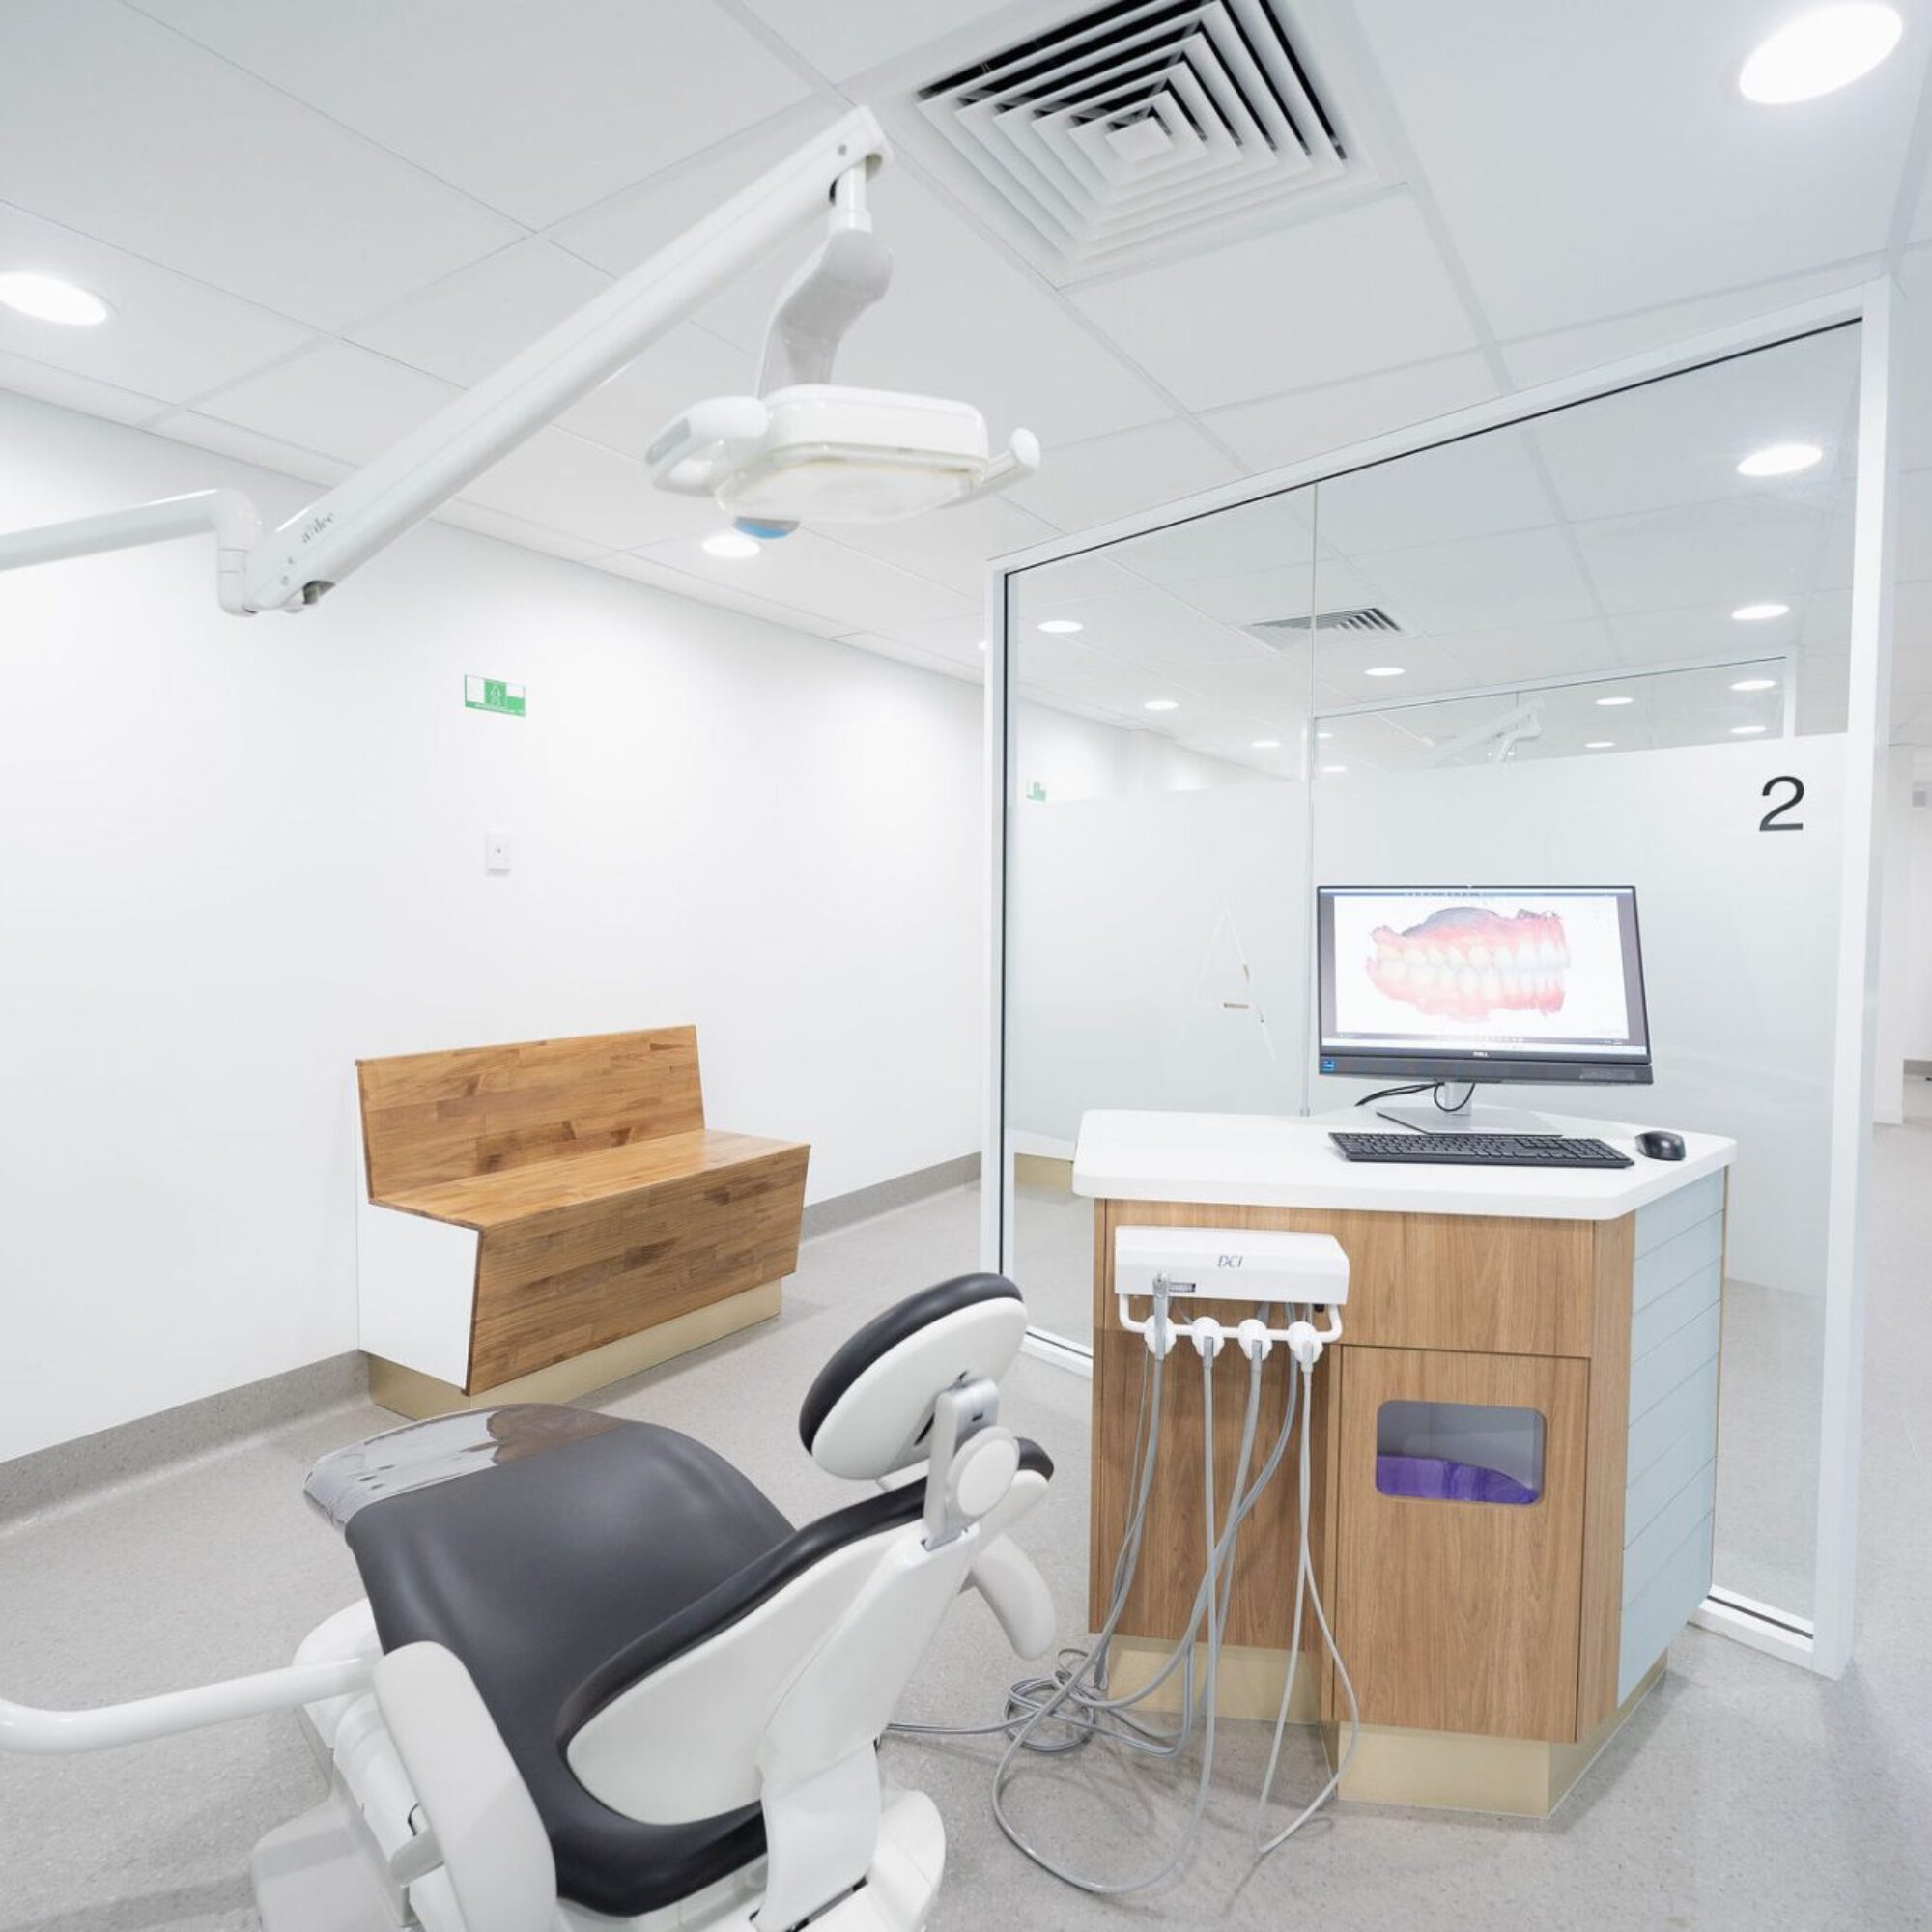 a Perth orthodontic clinic with advanced technology